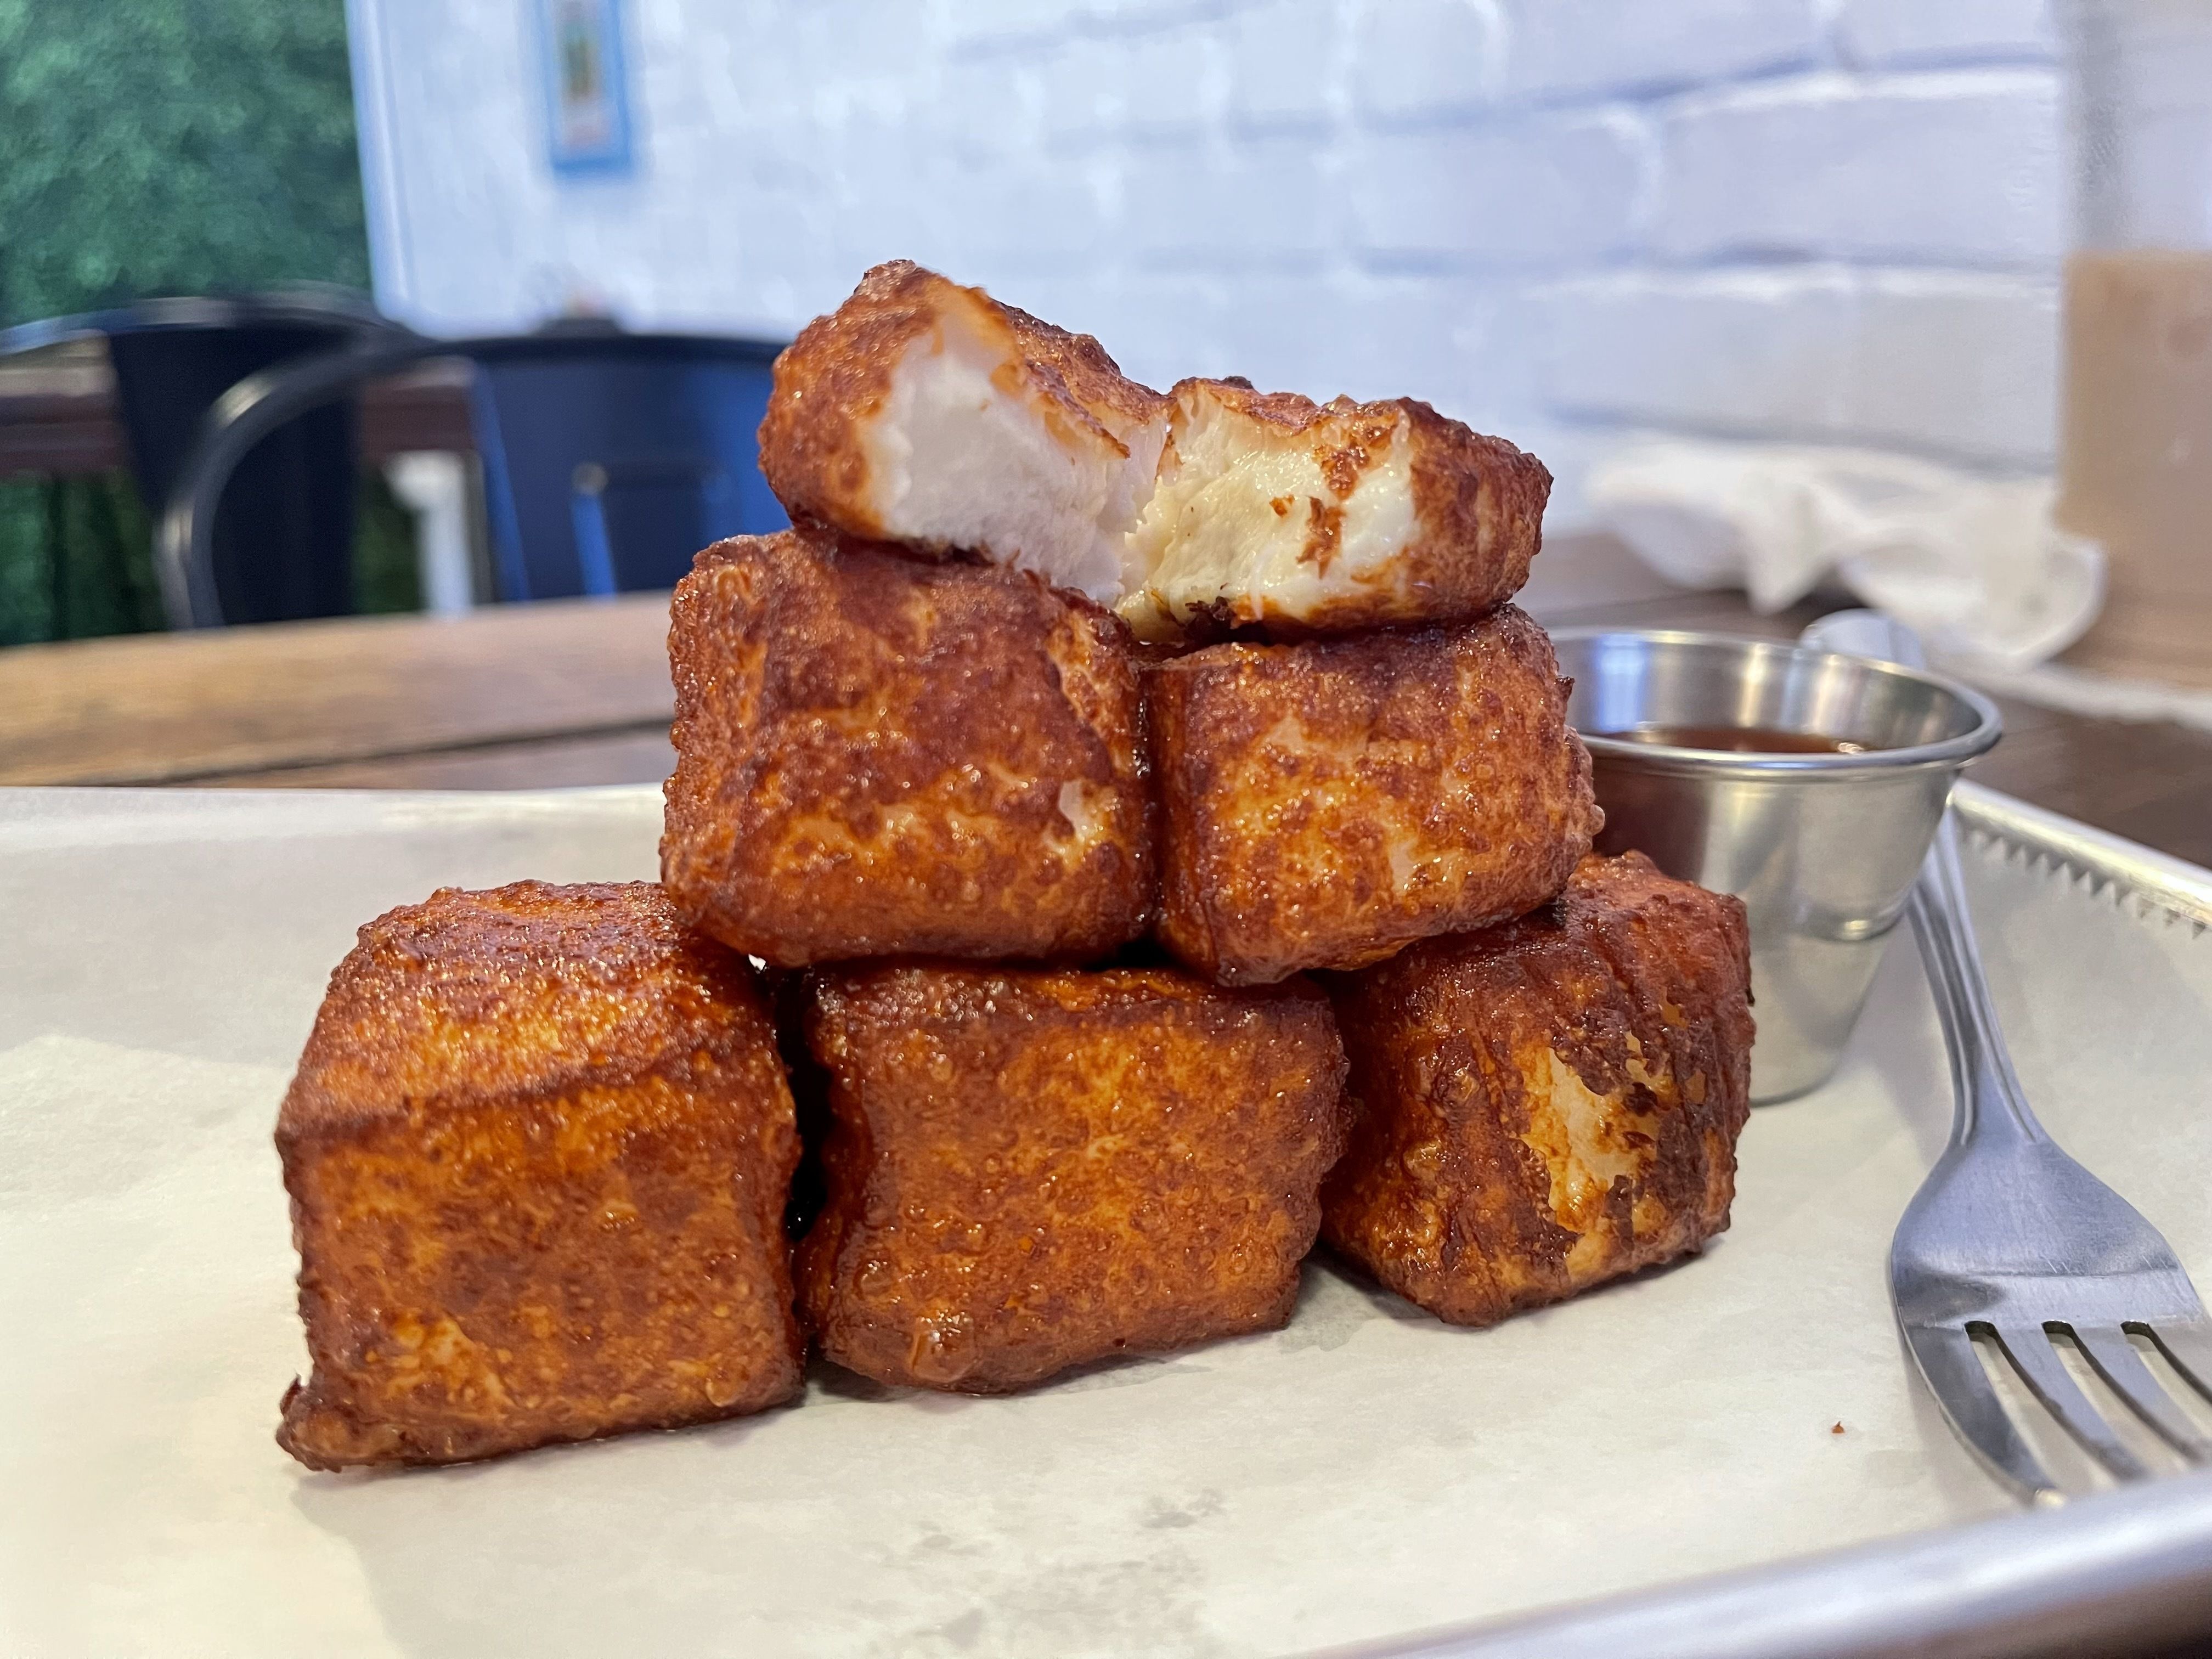 A pyramid of fried cheese cubes with a cut up one on top